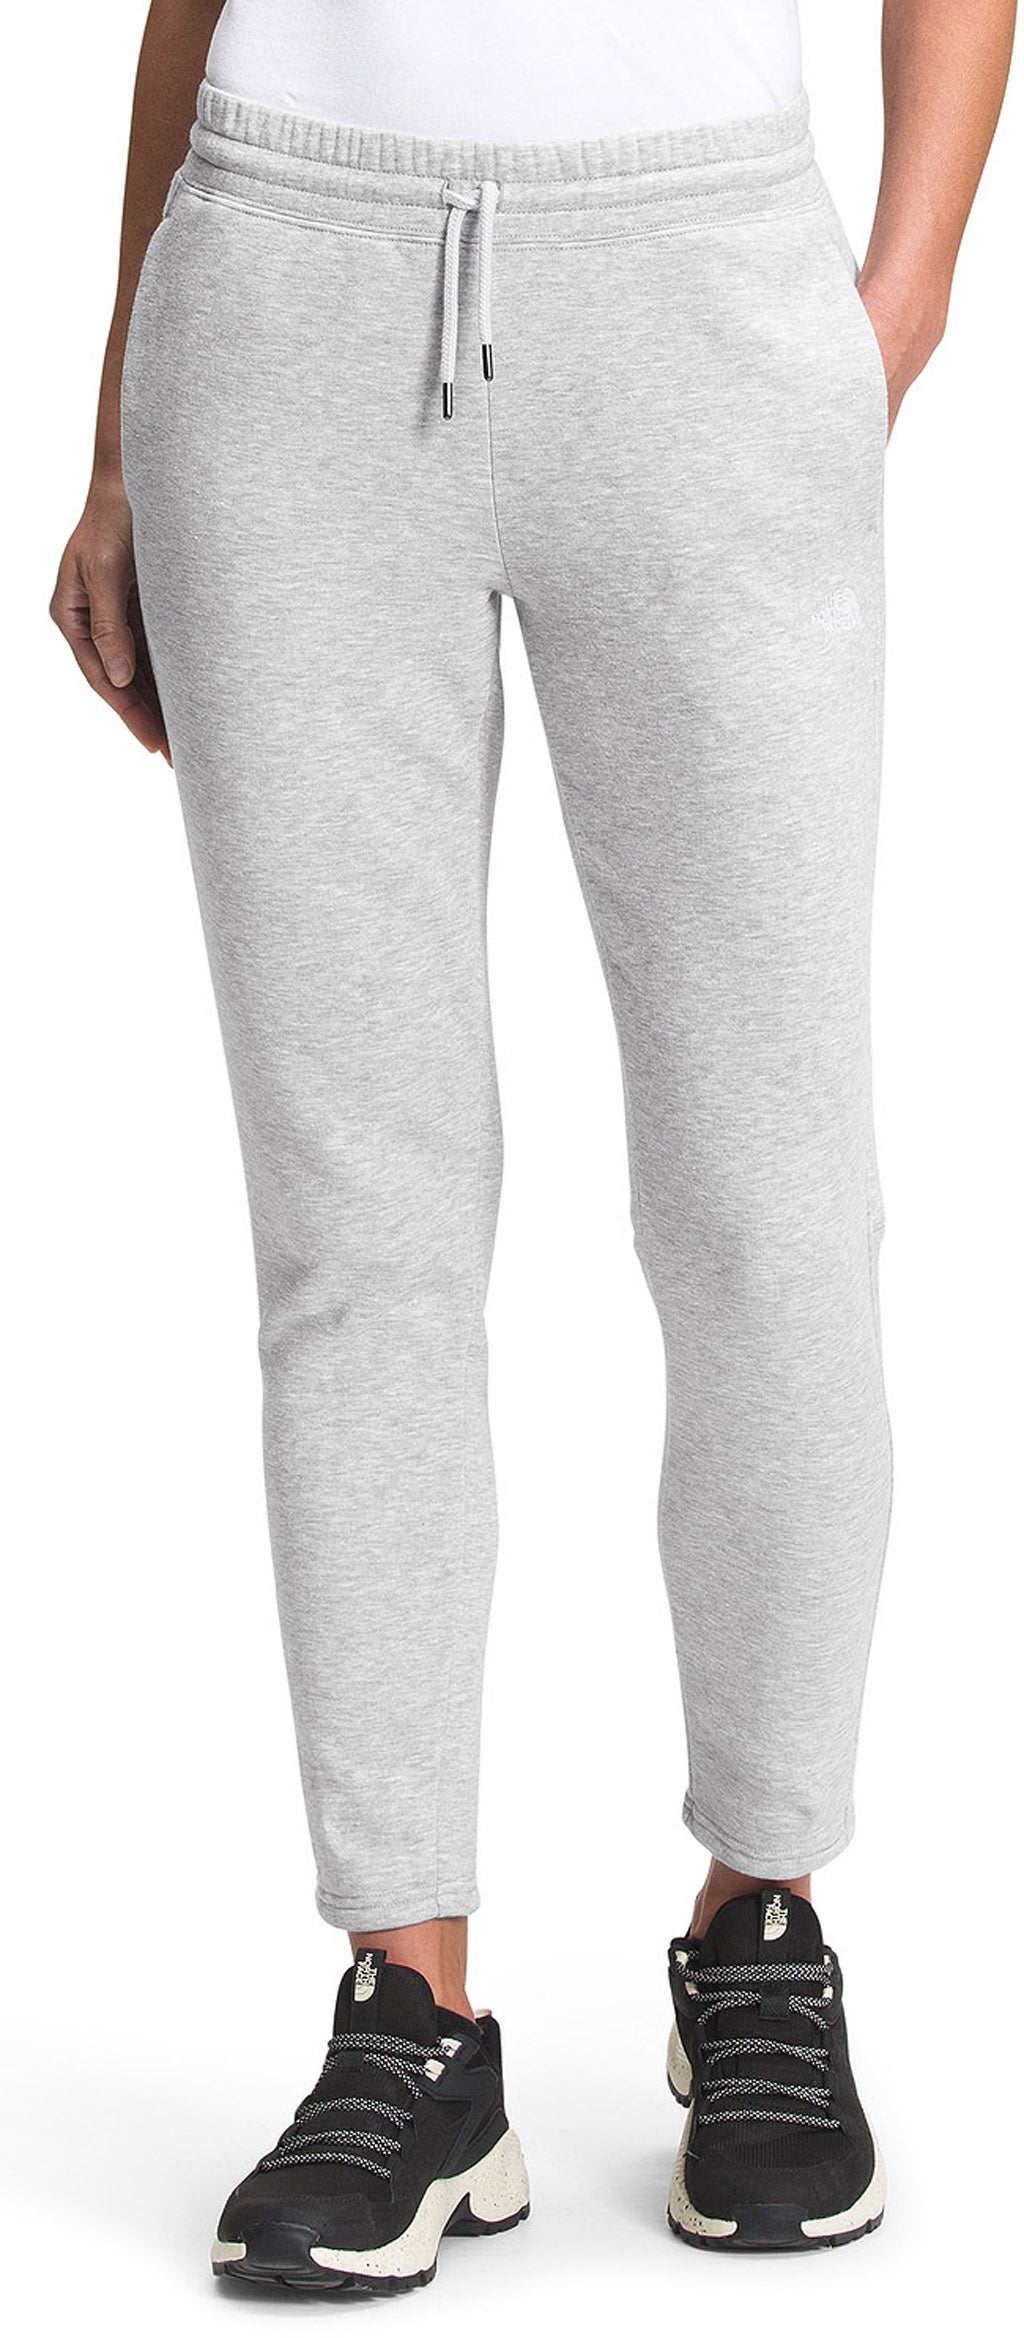 THE NORTH FACE Half Dome Womens Sweatpants